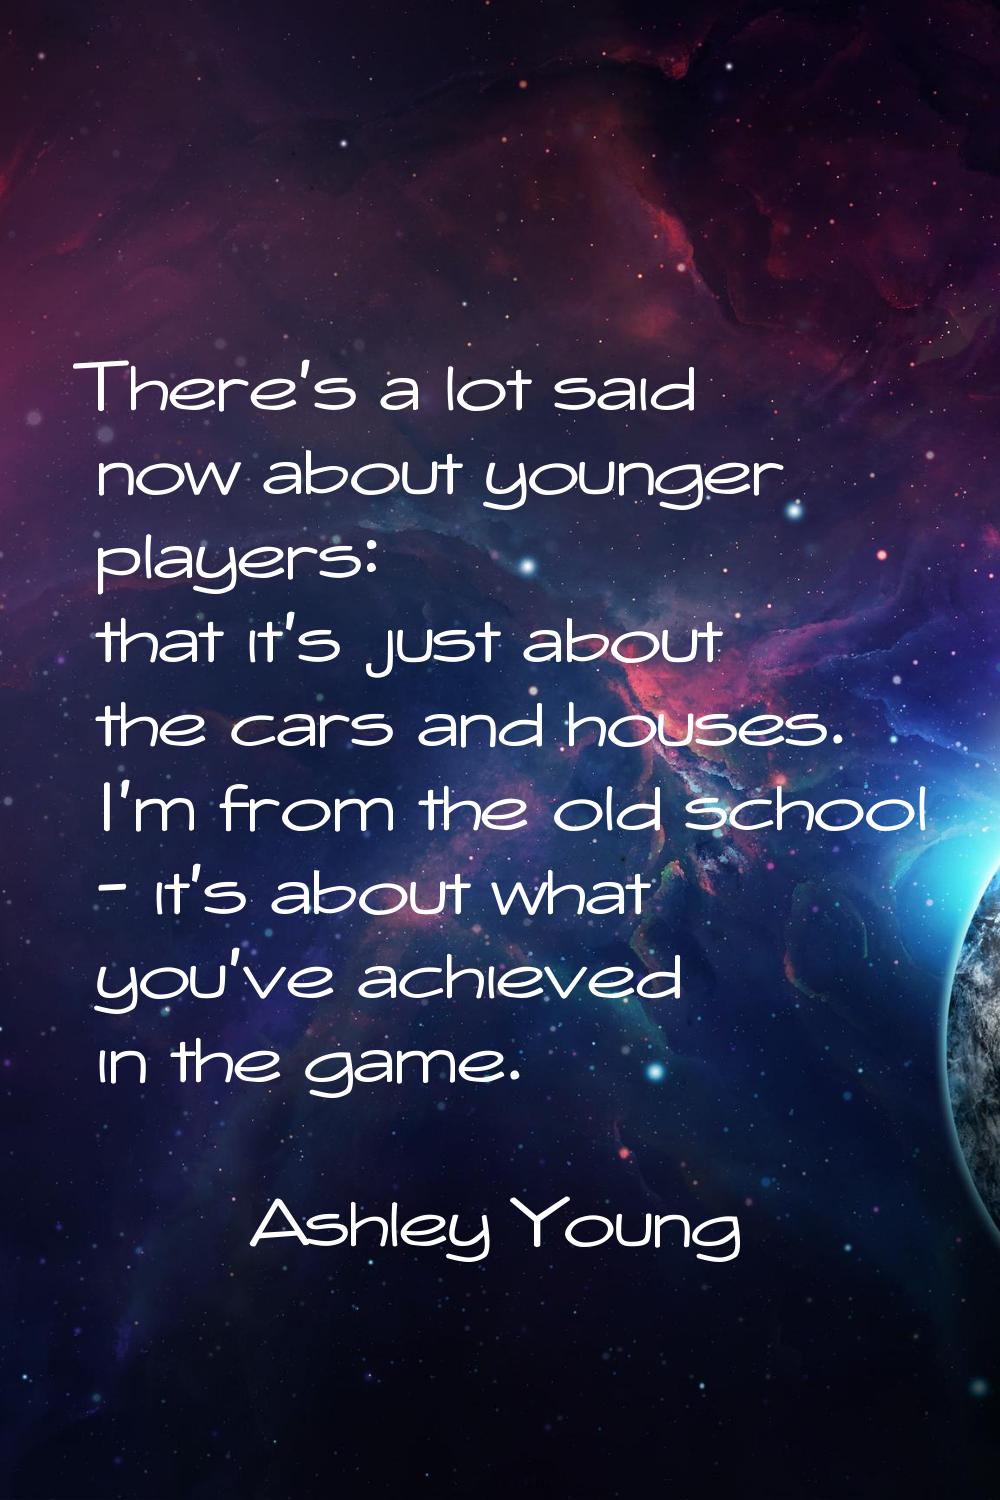 There's a lot said now about younger players: that it's just about the cars and houses. I'm from th